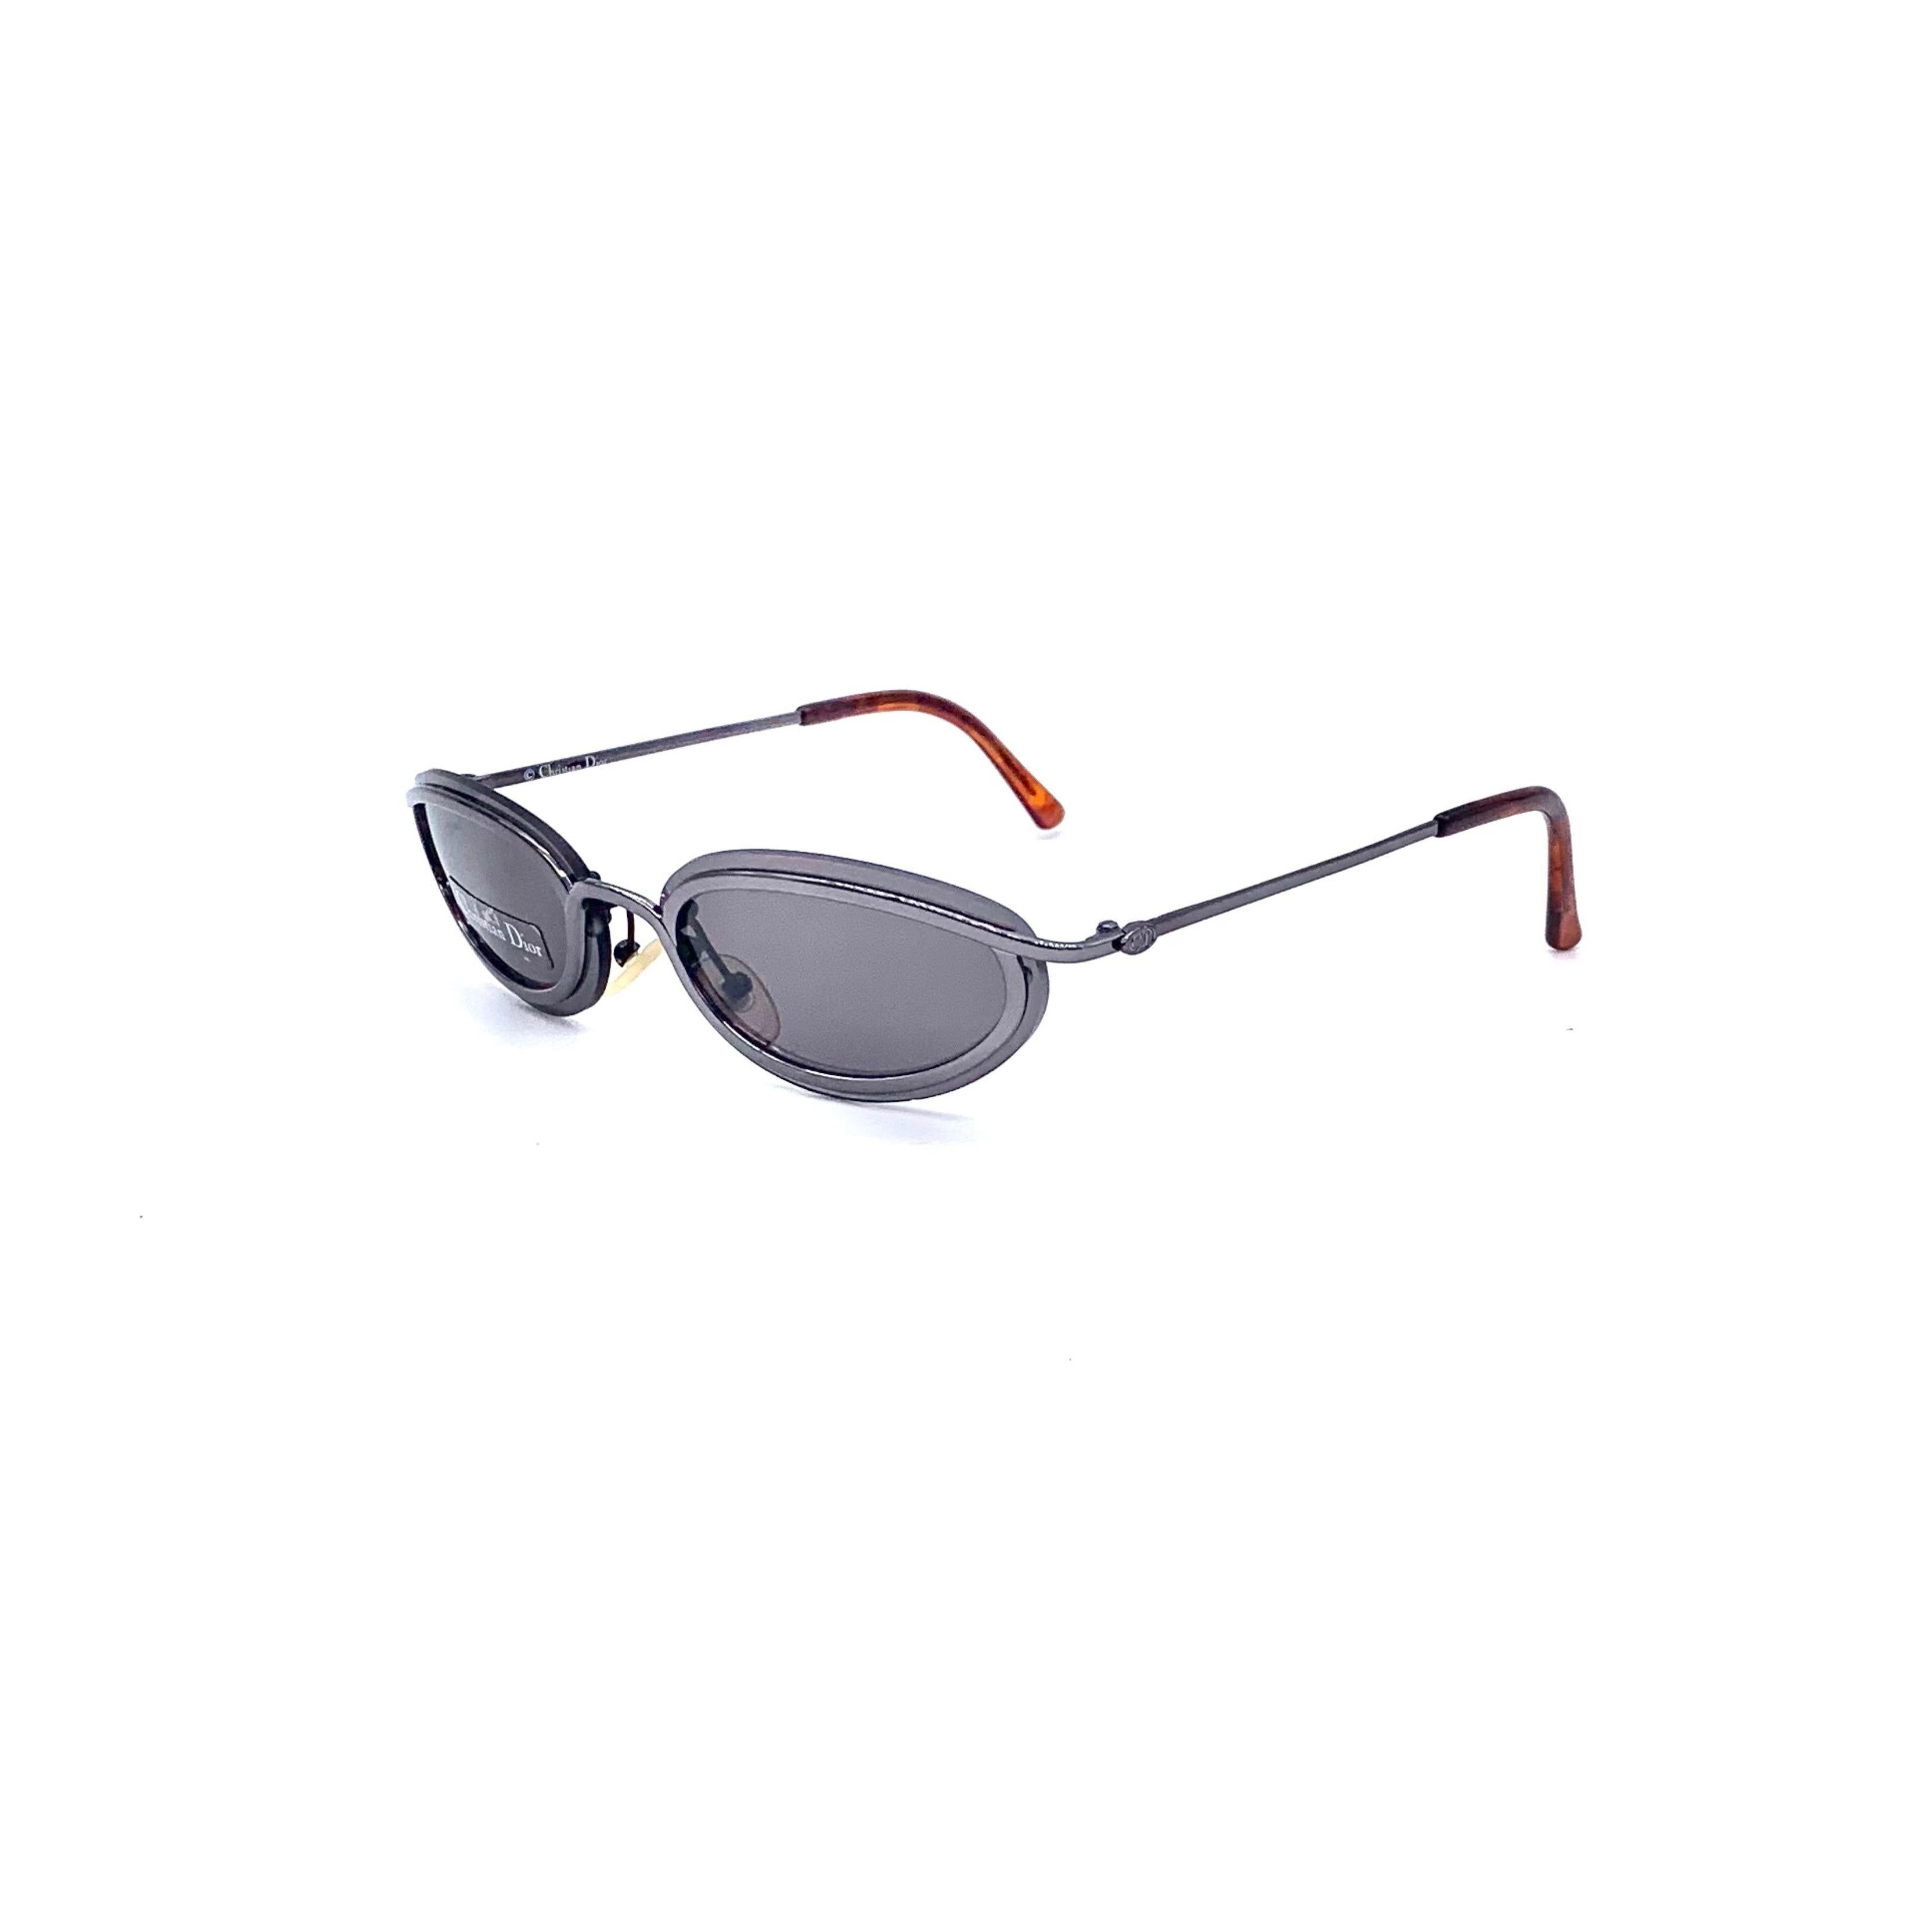 These vintage Christian Dior sunglasses feature a chic oval frame, overlaid with a unique chromatic silver metal structure. An iconic style from the 90s, these sunglasses will add a classic look to any outfit.
Inclusion: Original Case.